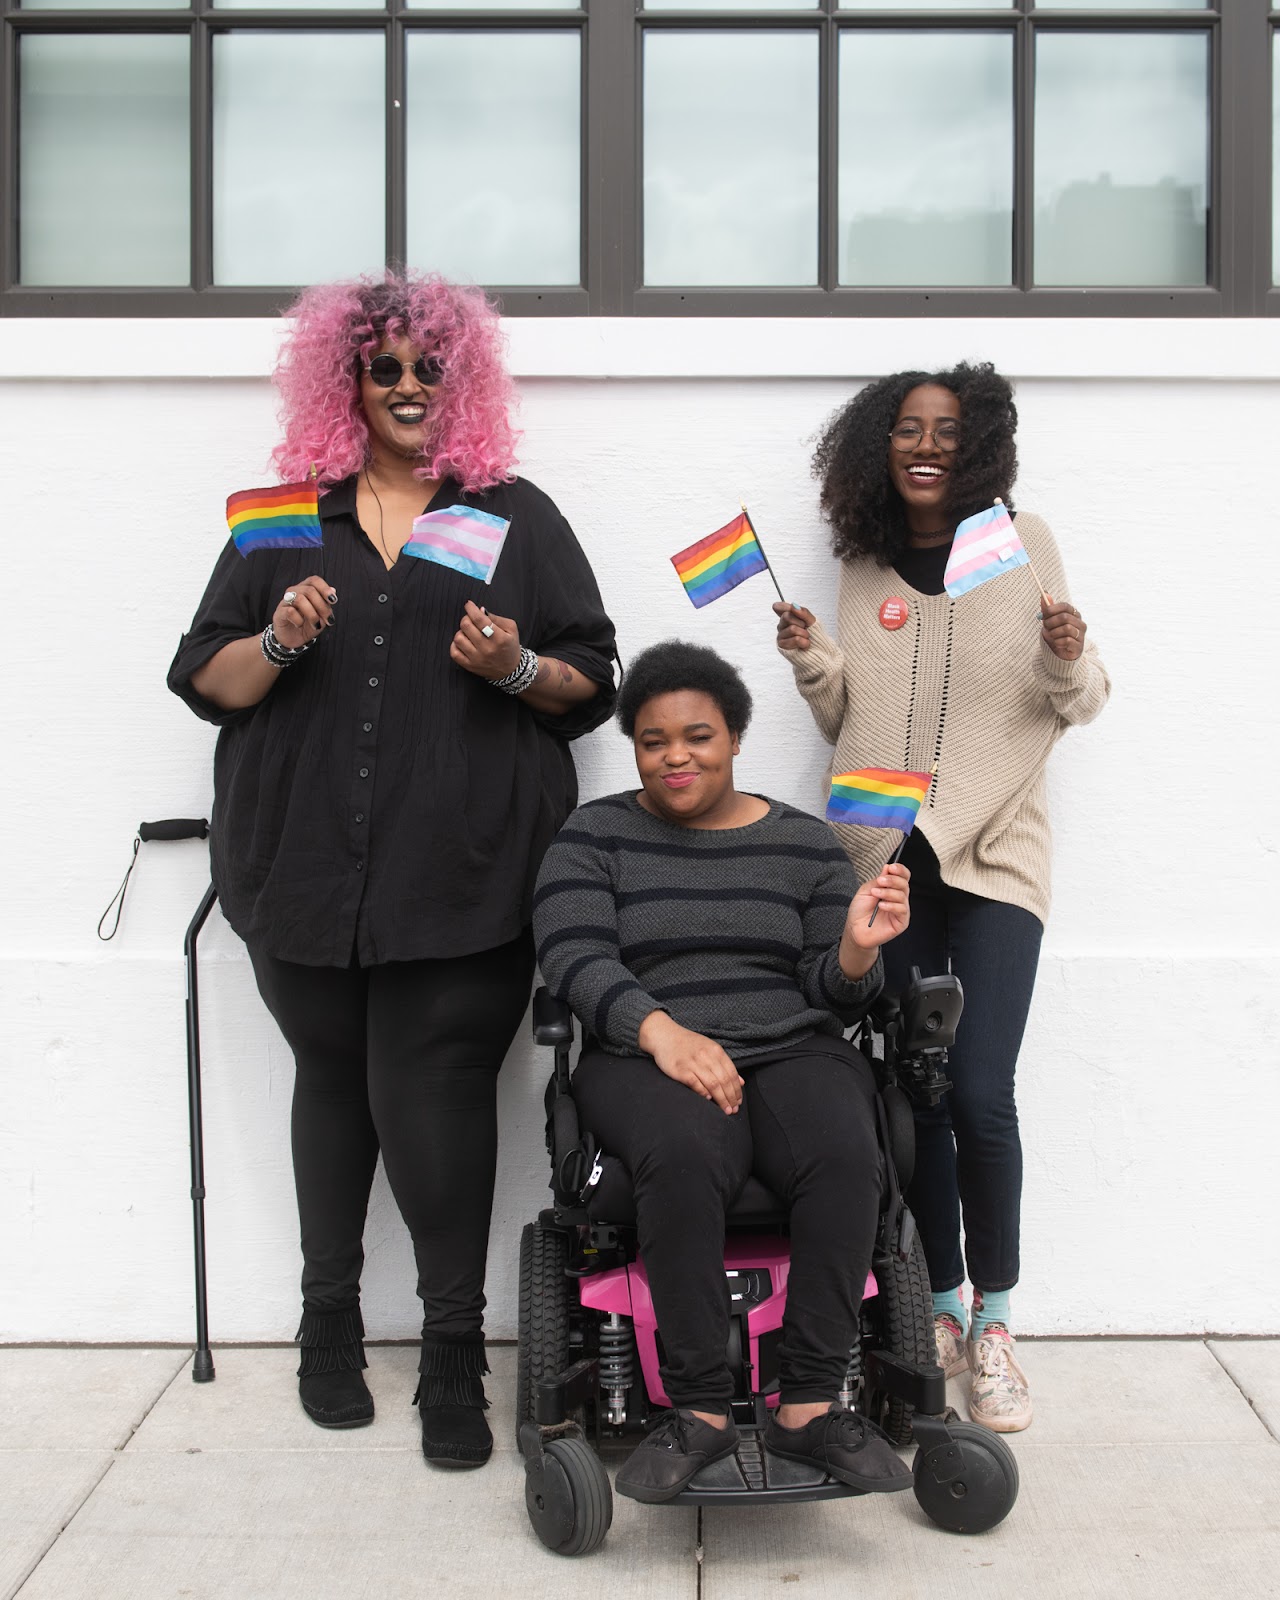 Three Black and disabled folx smile and hold mini flags. On the left, a non-binary person holds both a rainbow pride flag and a transgender pride flag, while a cane rests behind her. In the middle, a non-binary person waves the rainbow flag while in their power wheelchair. On the right, a femme waves both a rainbow and transgender pride flag. (via Disabled and Here image collection)